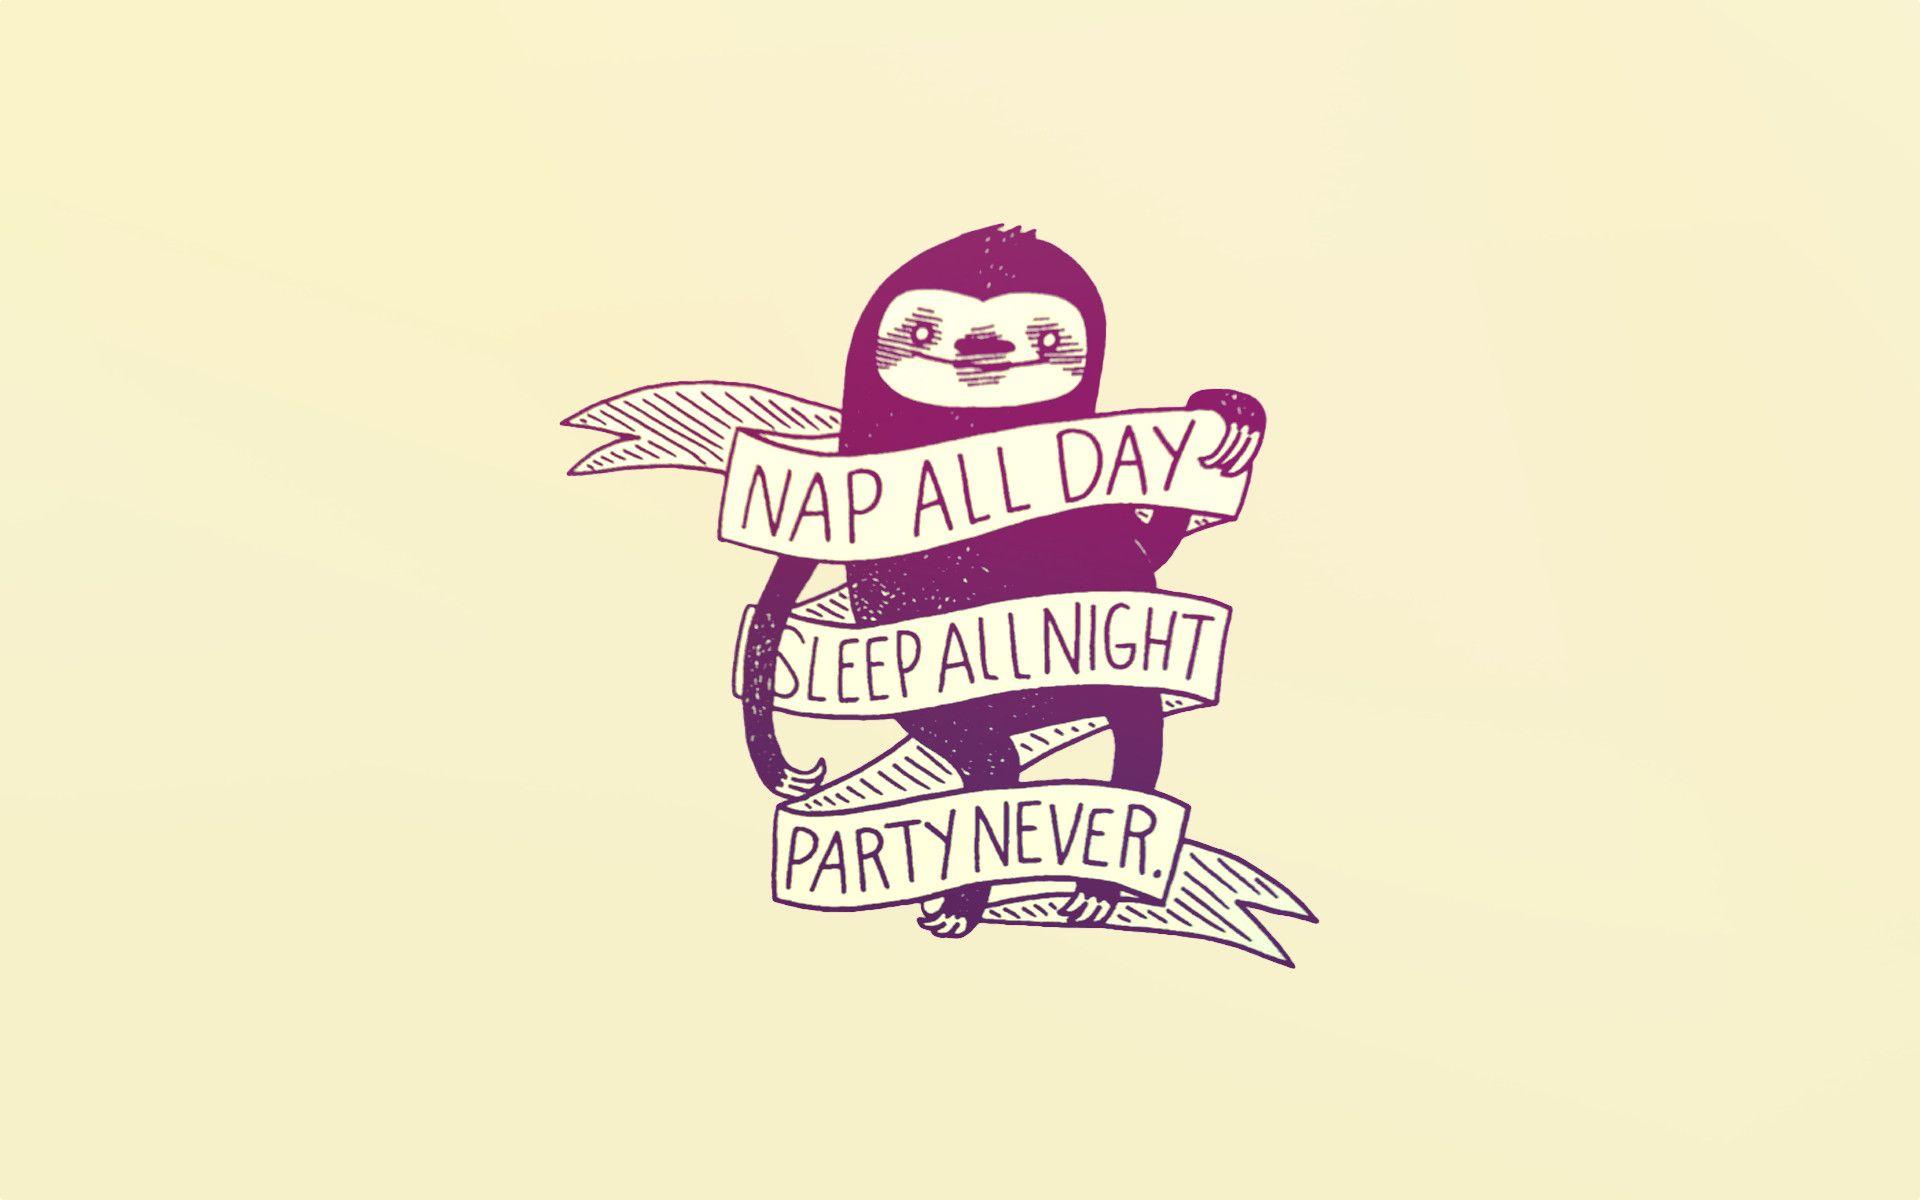 Made a wallpaper out of "Nap all day" sloth